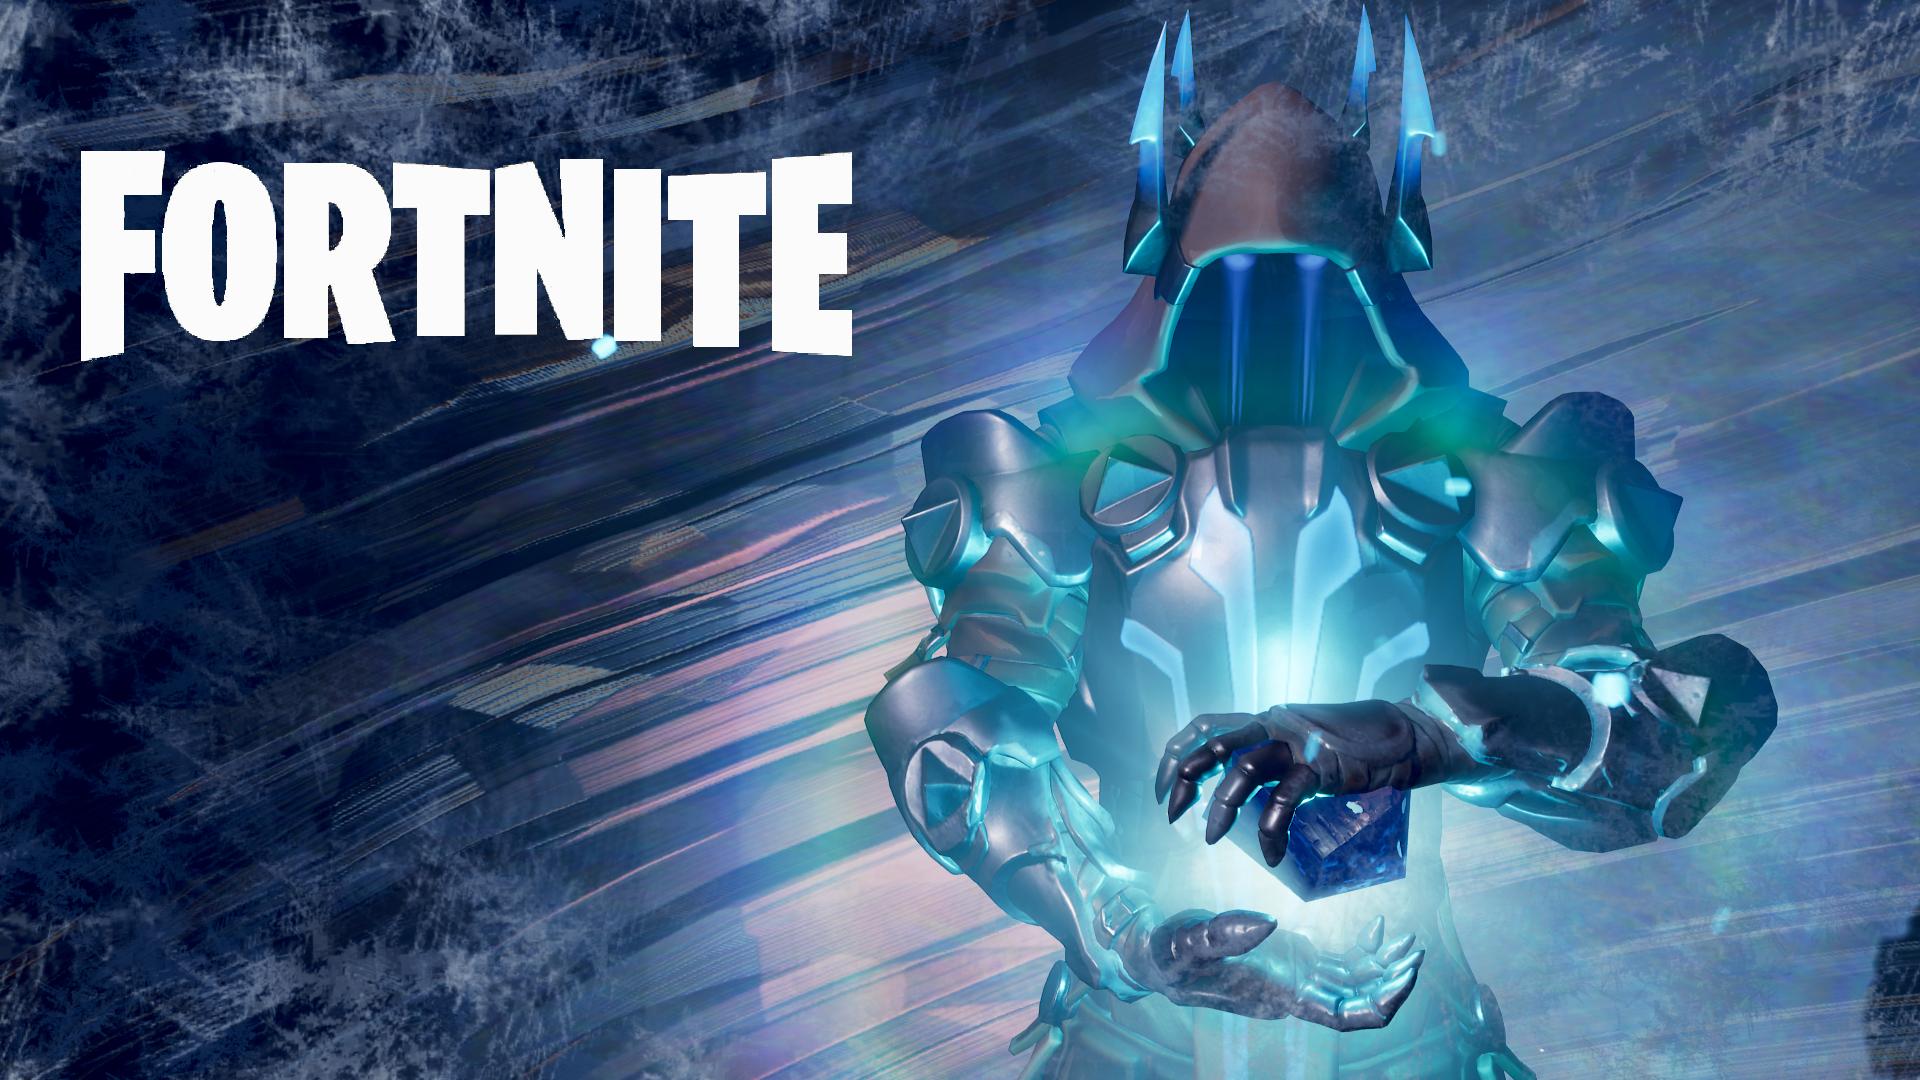 Free download Fortnite Ice King Event Wallpaper I made